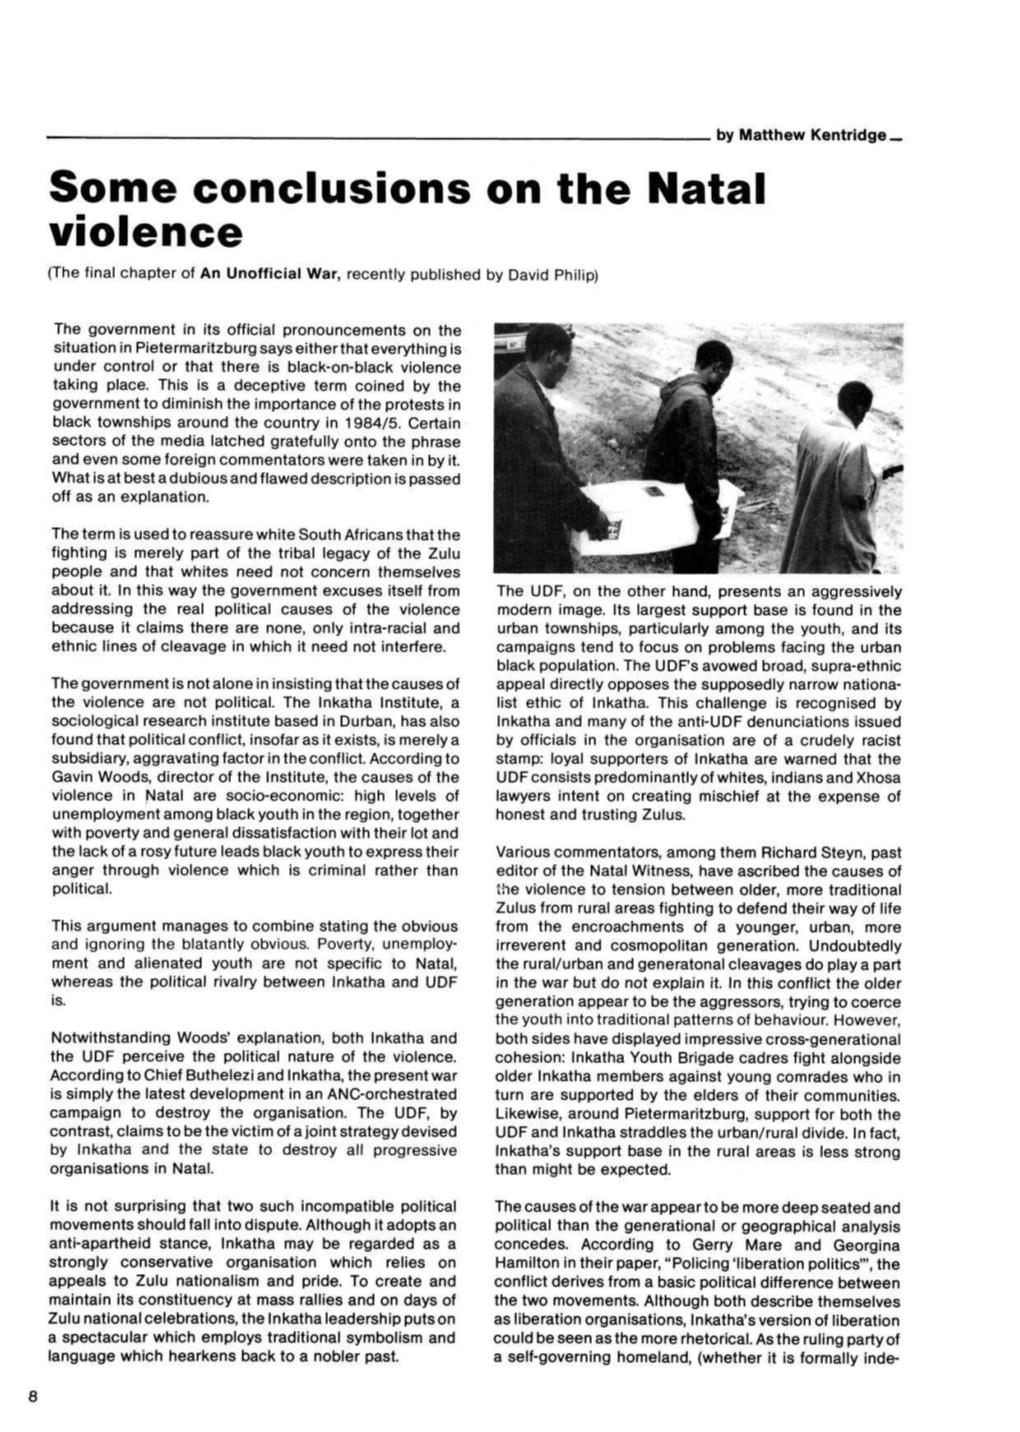 Some Conclusions on the Natal Violence (The Final Chapter of an Unofficial War, Recently Published by David Philip)